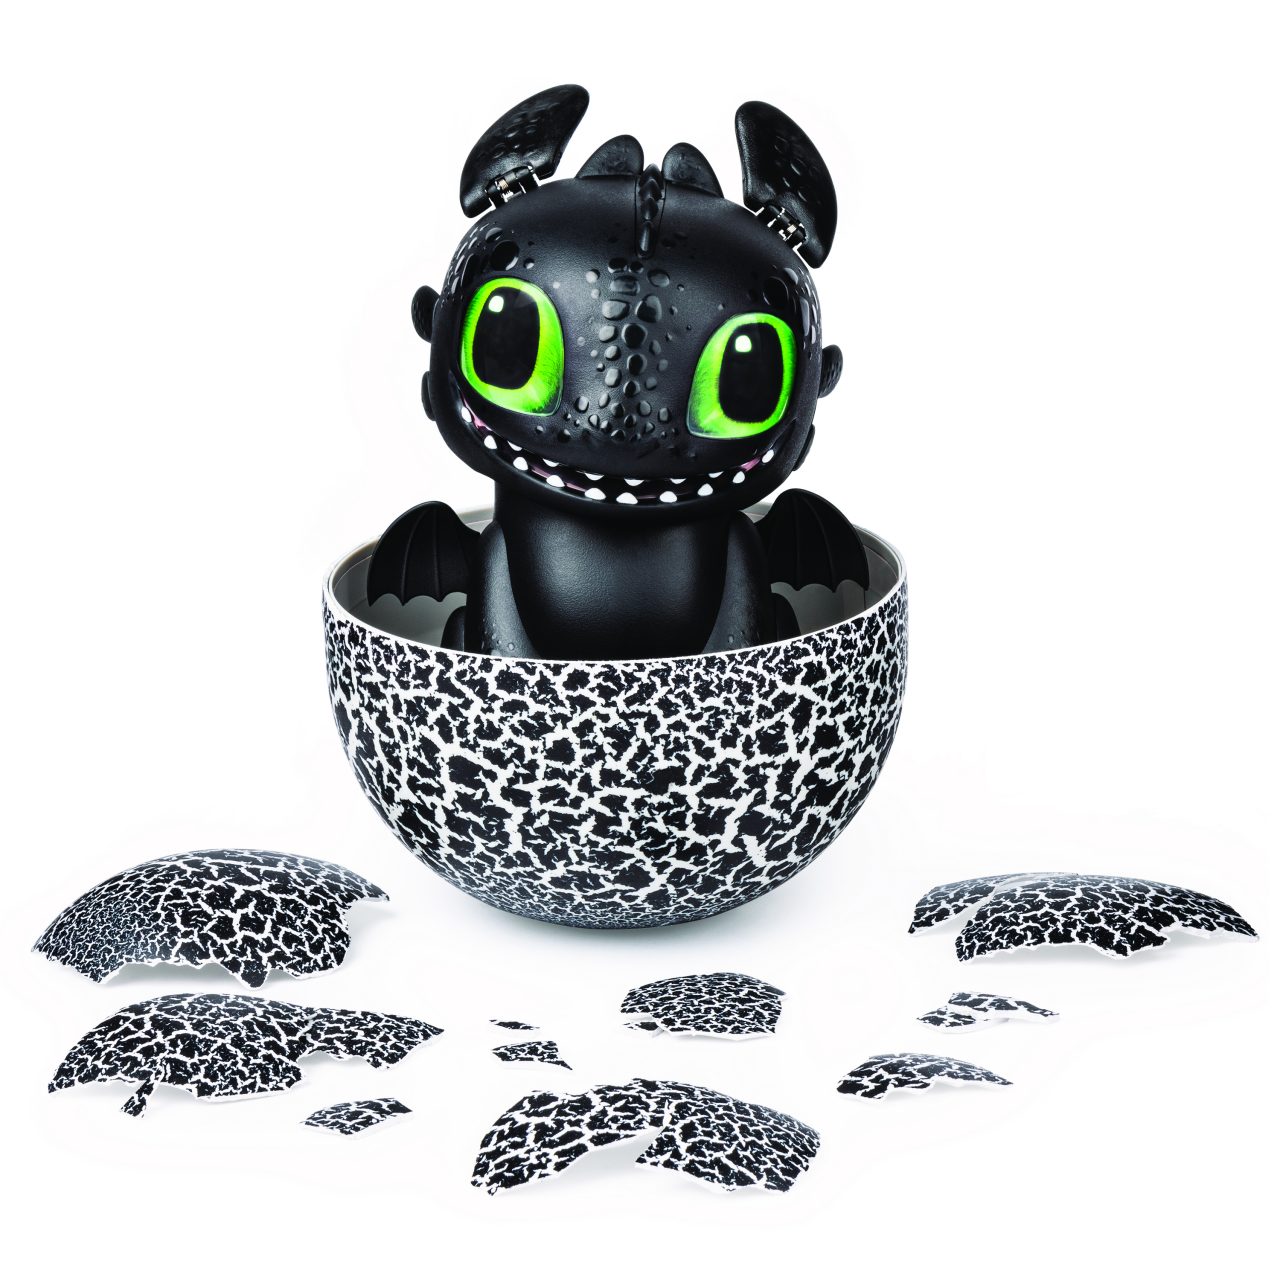 DreamWorks Dragons: Hatching Baby Toothless